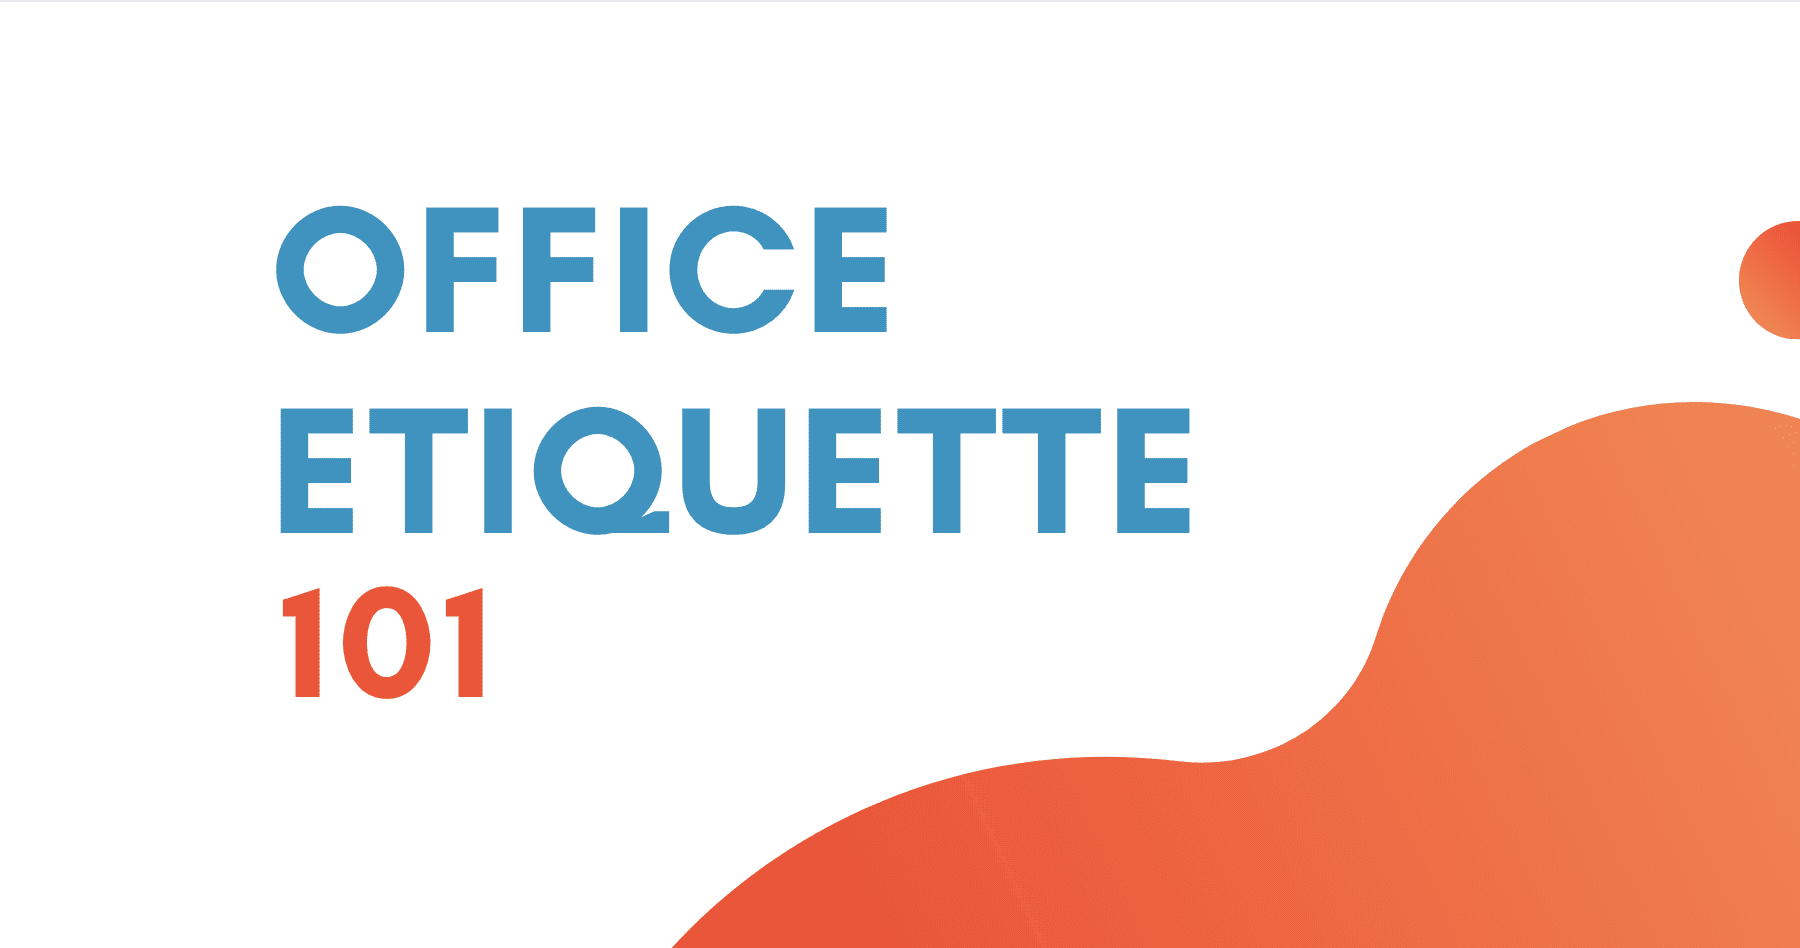 Office Etiquette 101: An Infographic